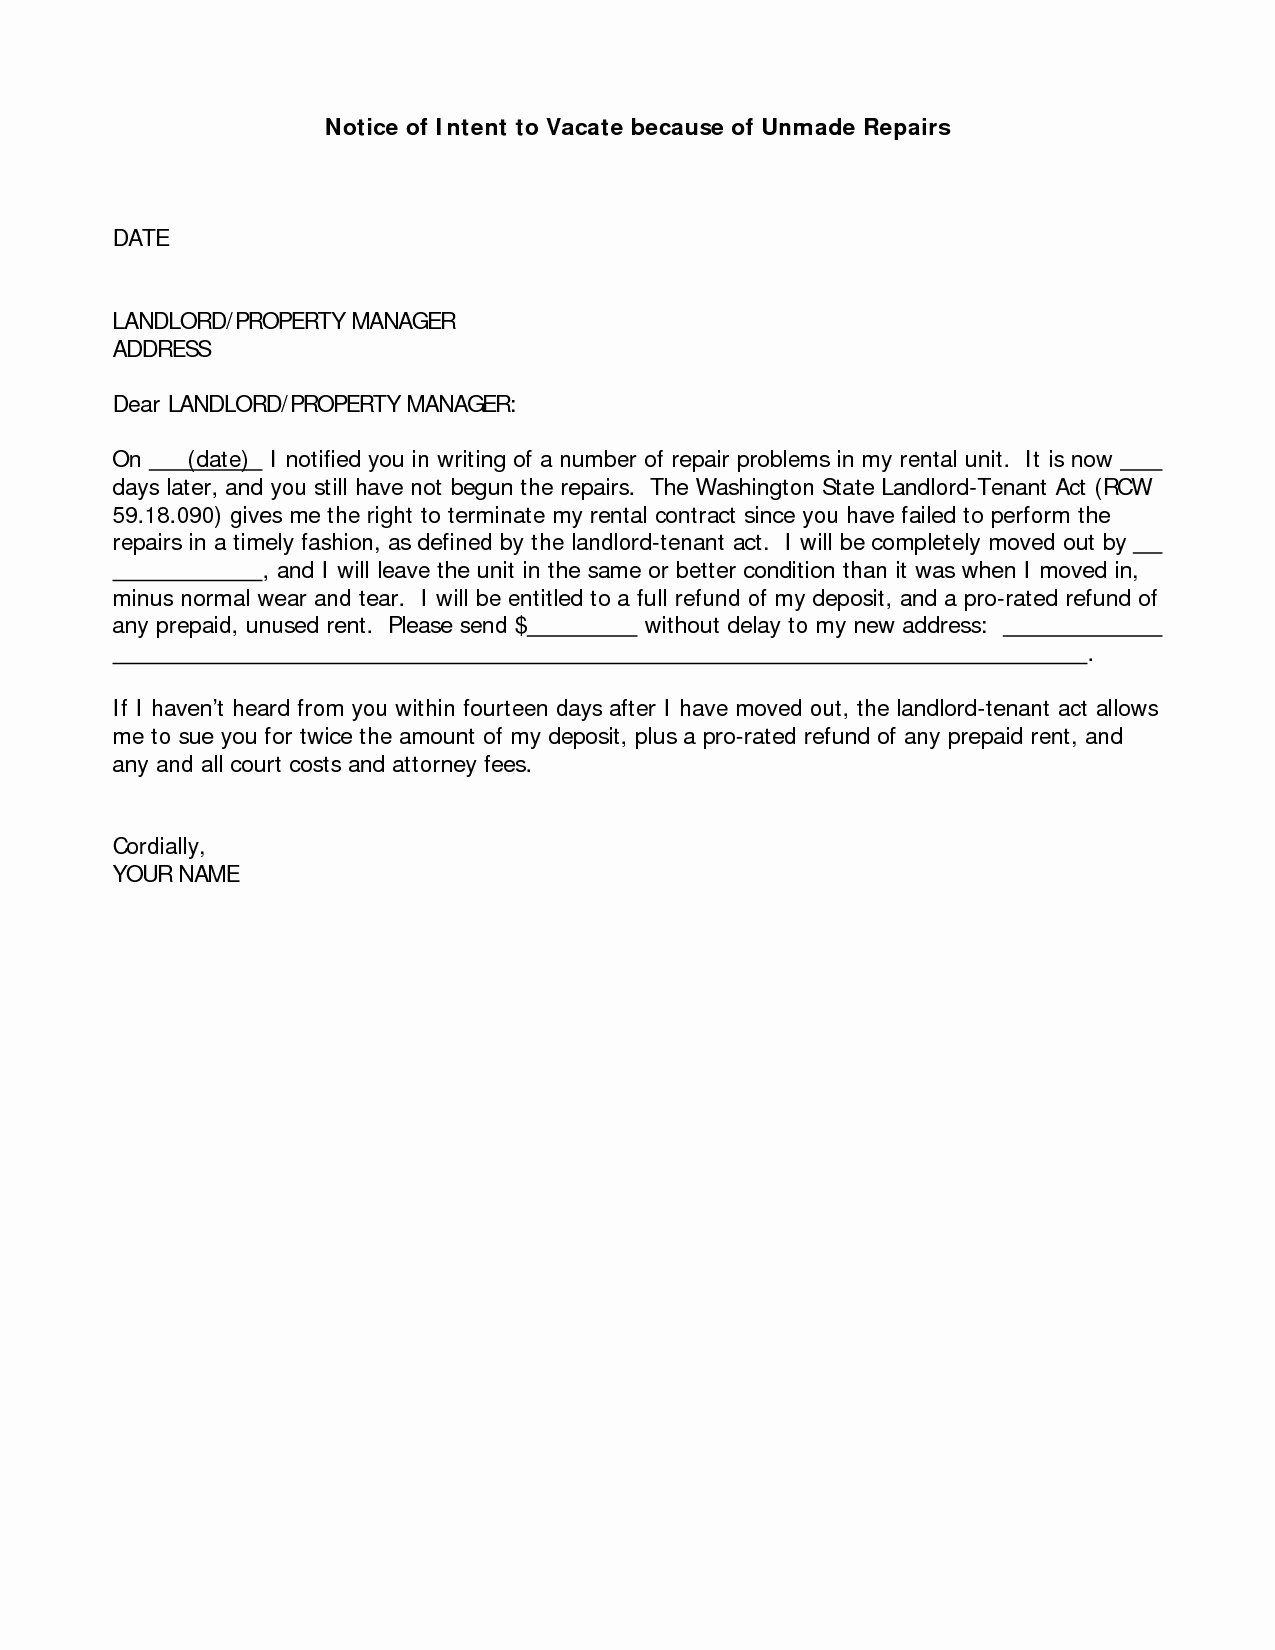 Notice to Vacate Apartment Letter Best Of Notice to Vacate Apartment Letter Template Samples